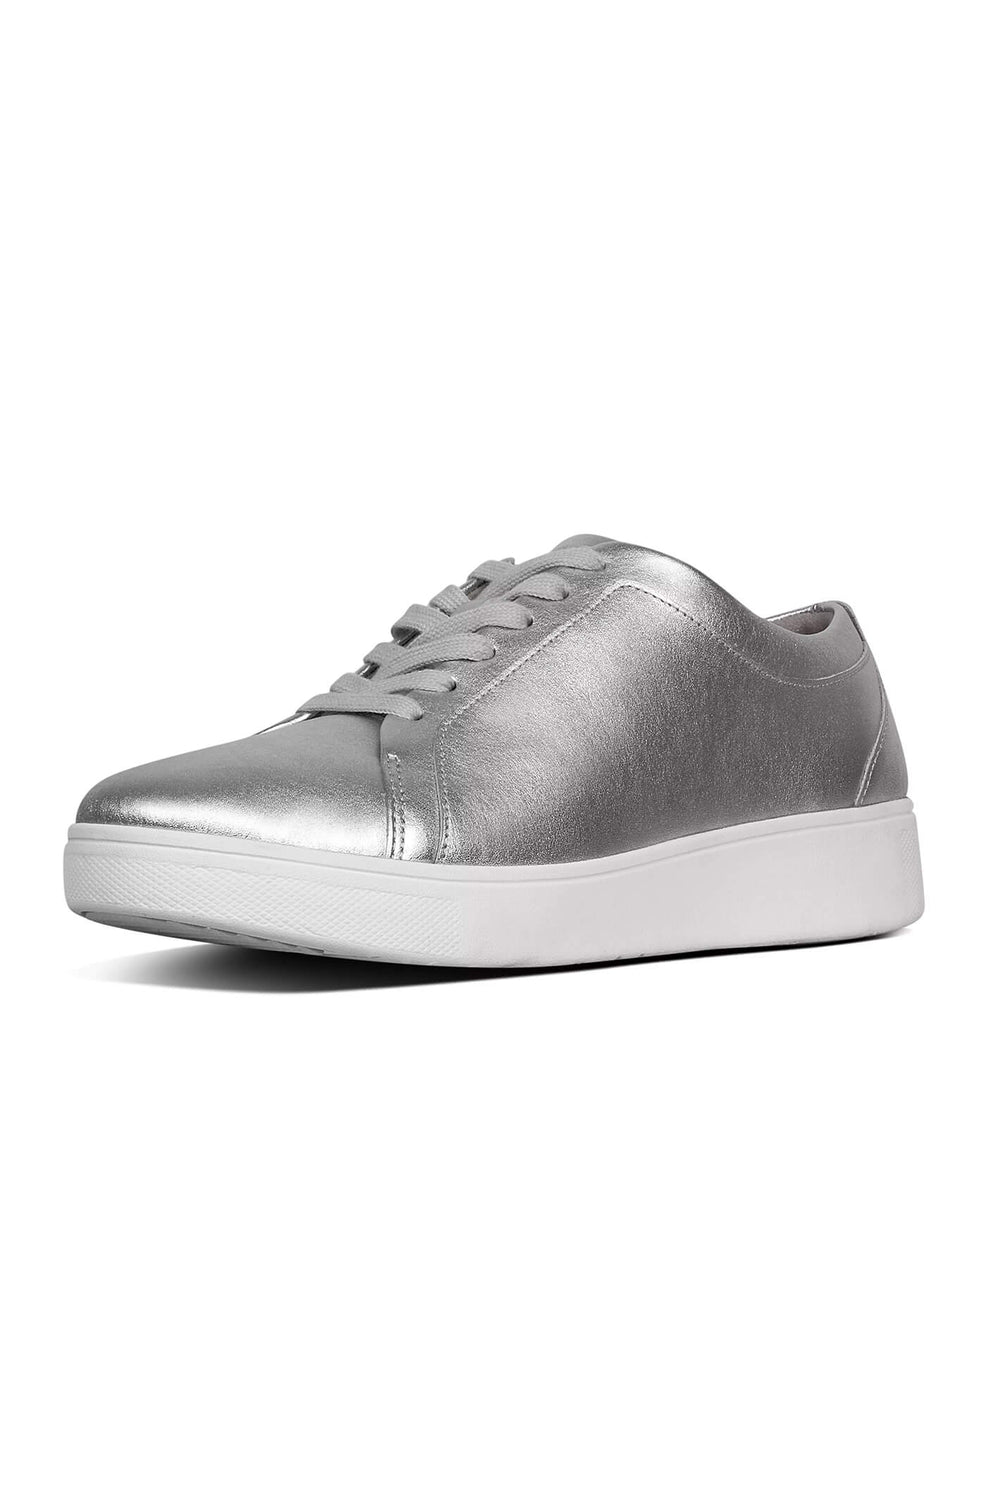 Fitflop Rally X22-011 Silver Trainer - Shirley Allum Boutique